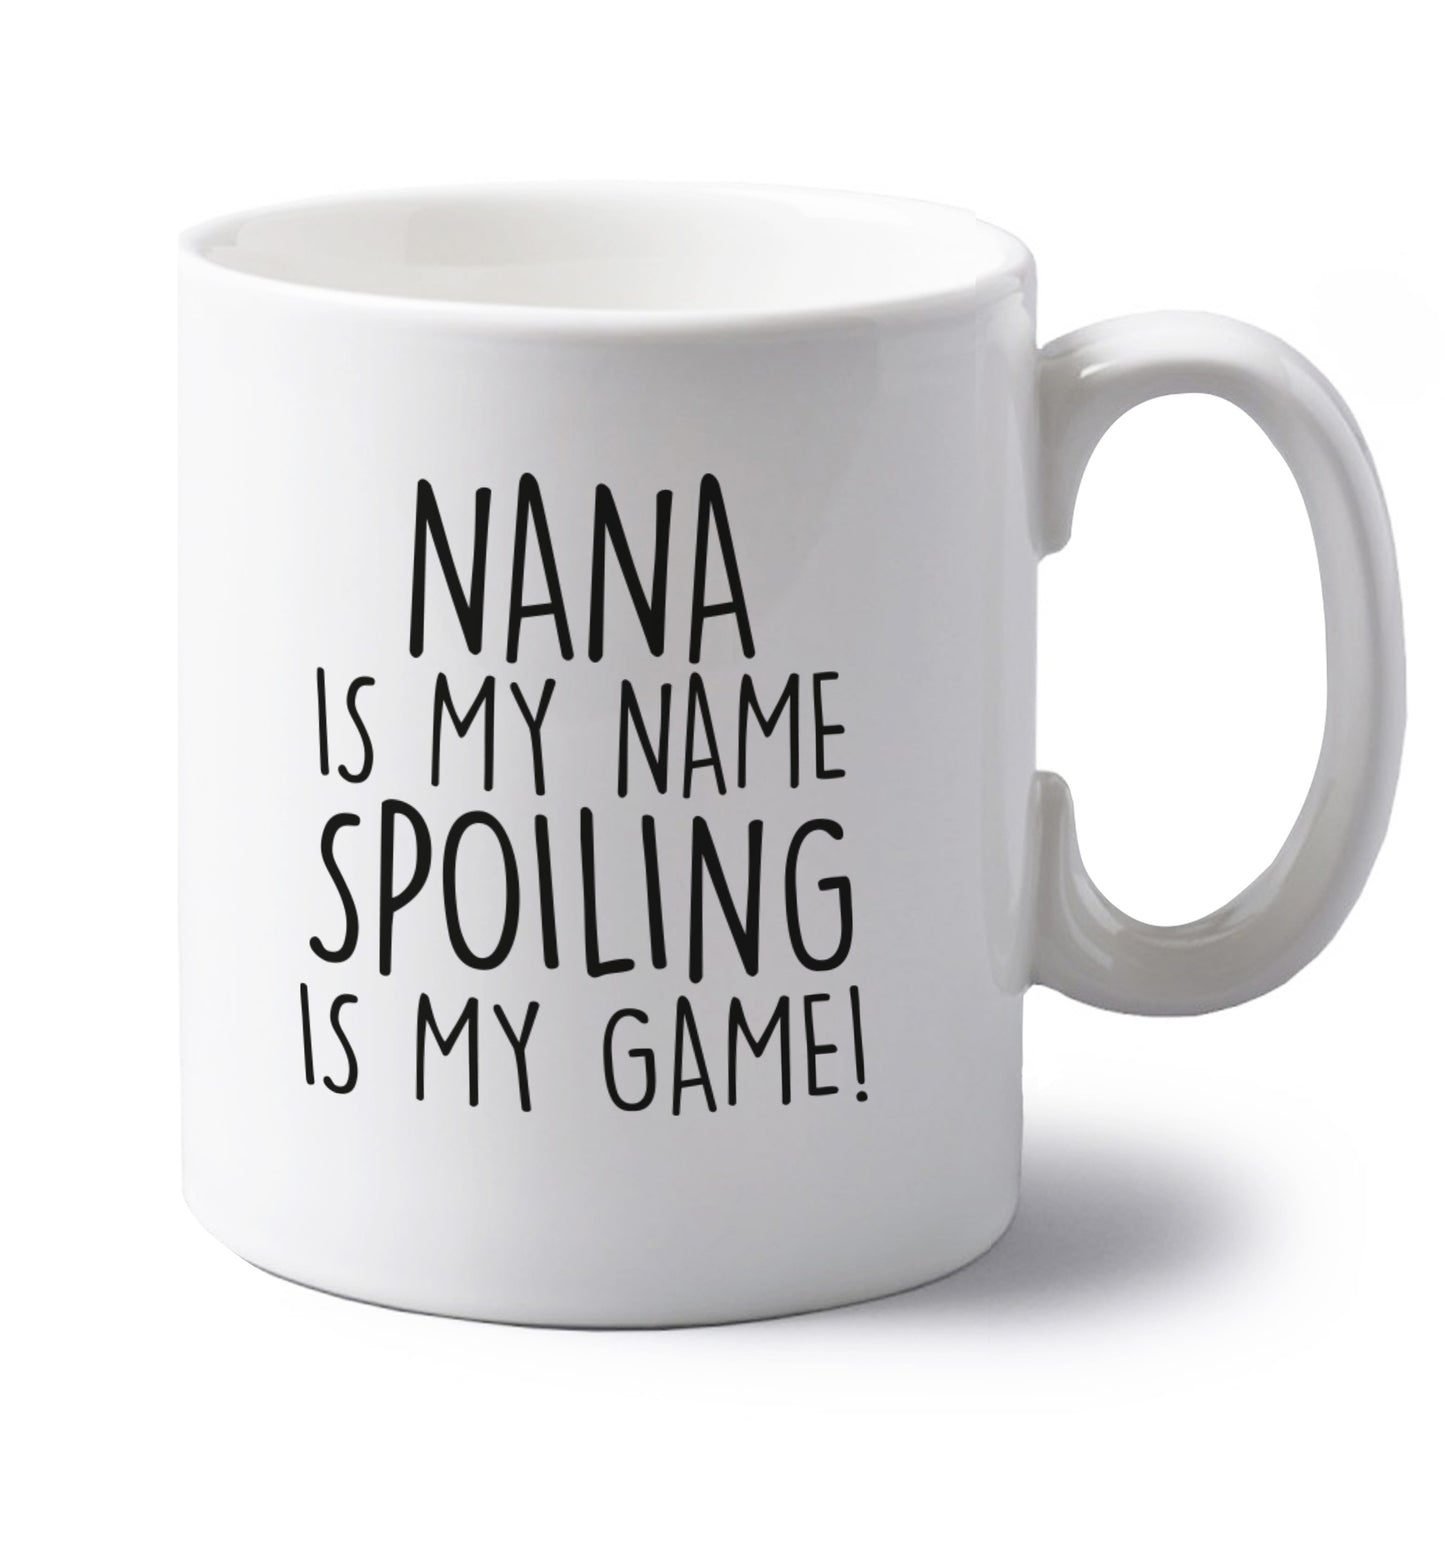 Nana is my name, spoiling is my game left handed white ceramic mug 